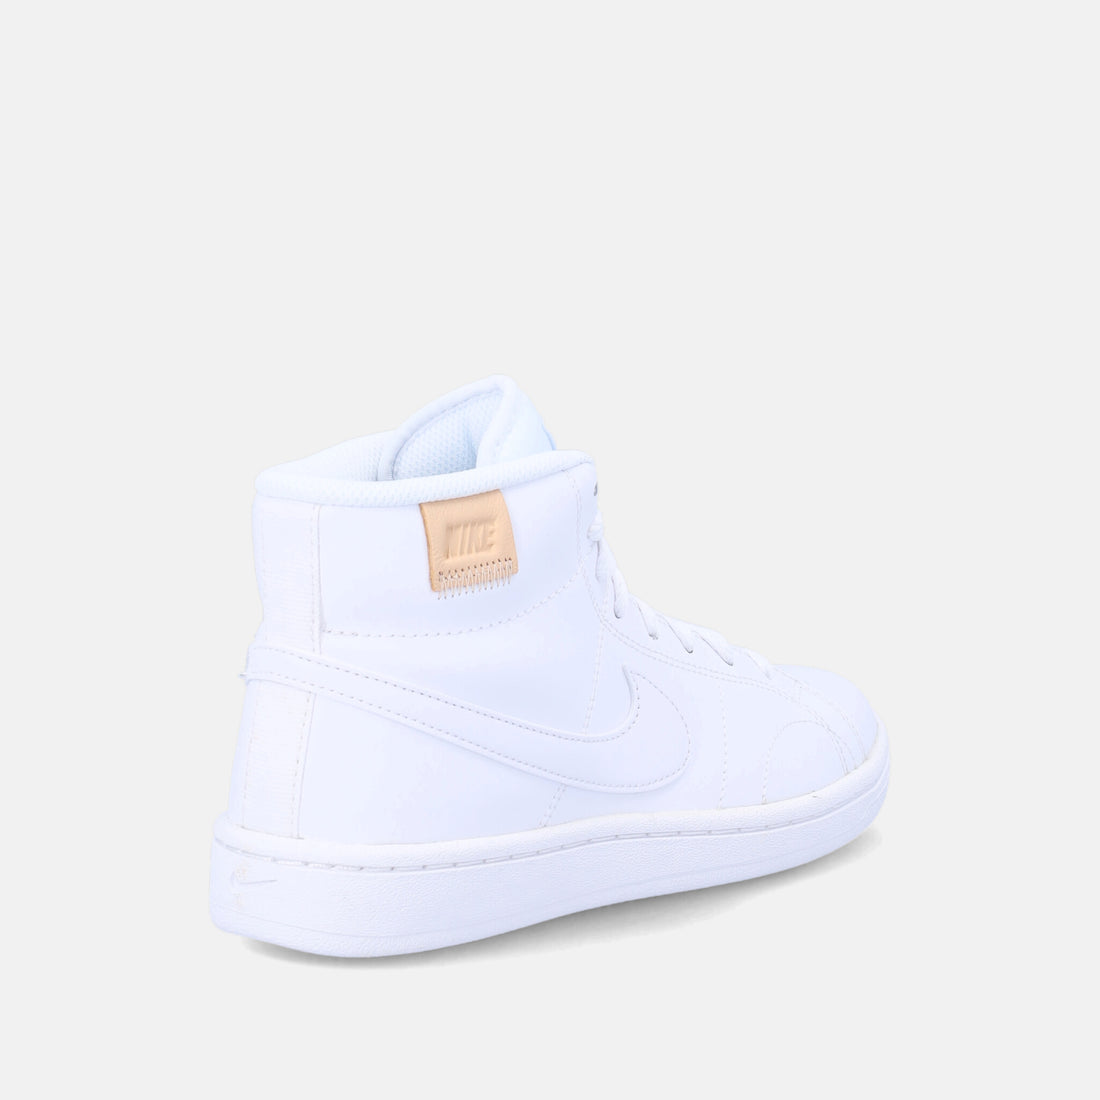 Nike Court Royale 2 Mid donna total white